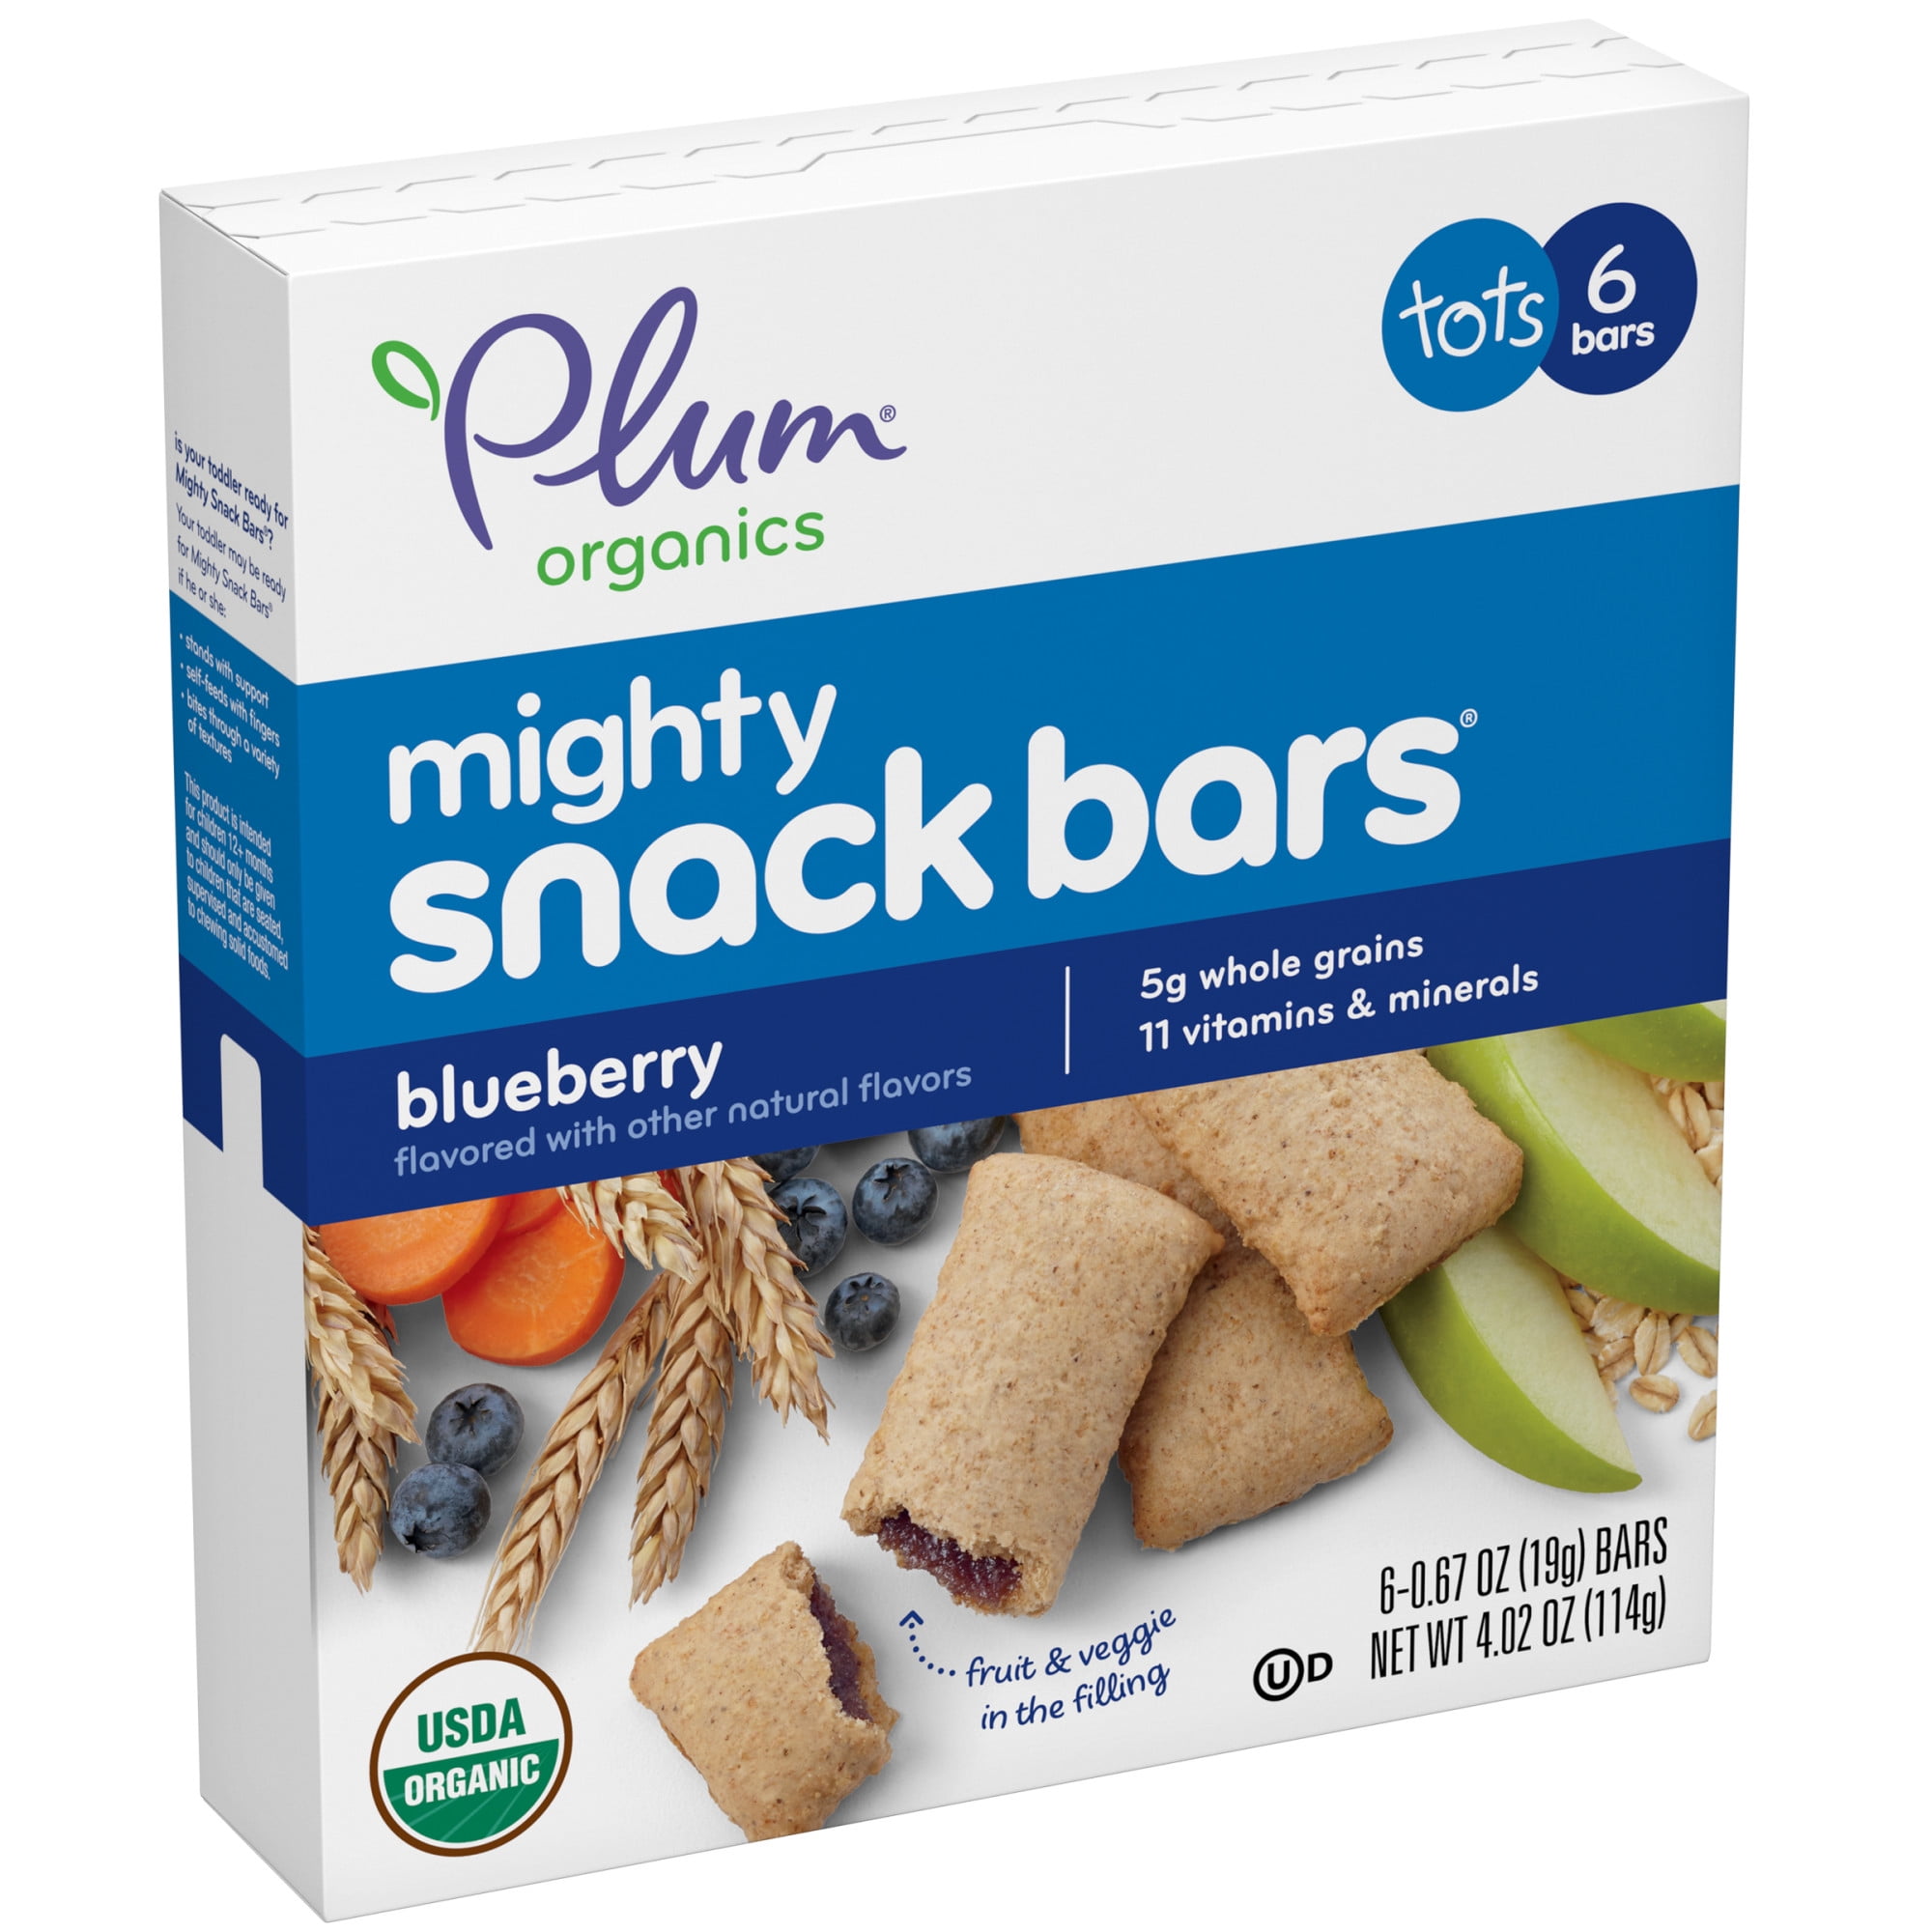 Plum Organics Mighty Snack Bars for Toddlers: Blueberry - 6 Ct, Baby Food